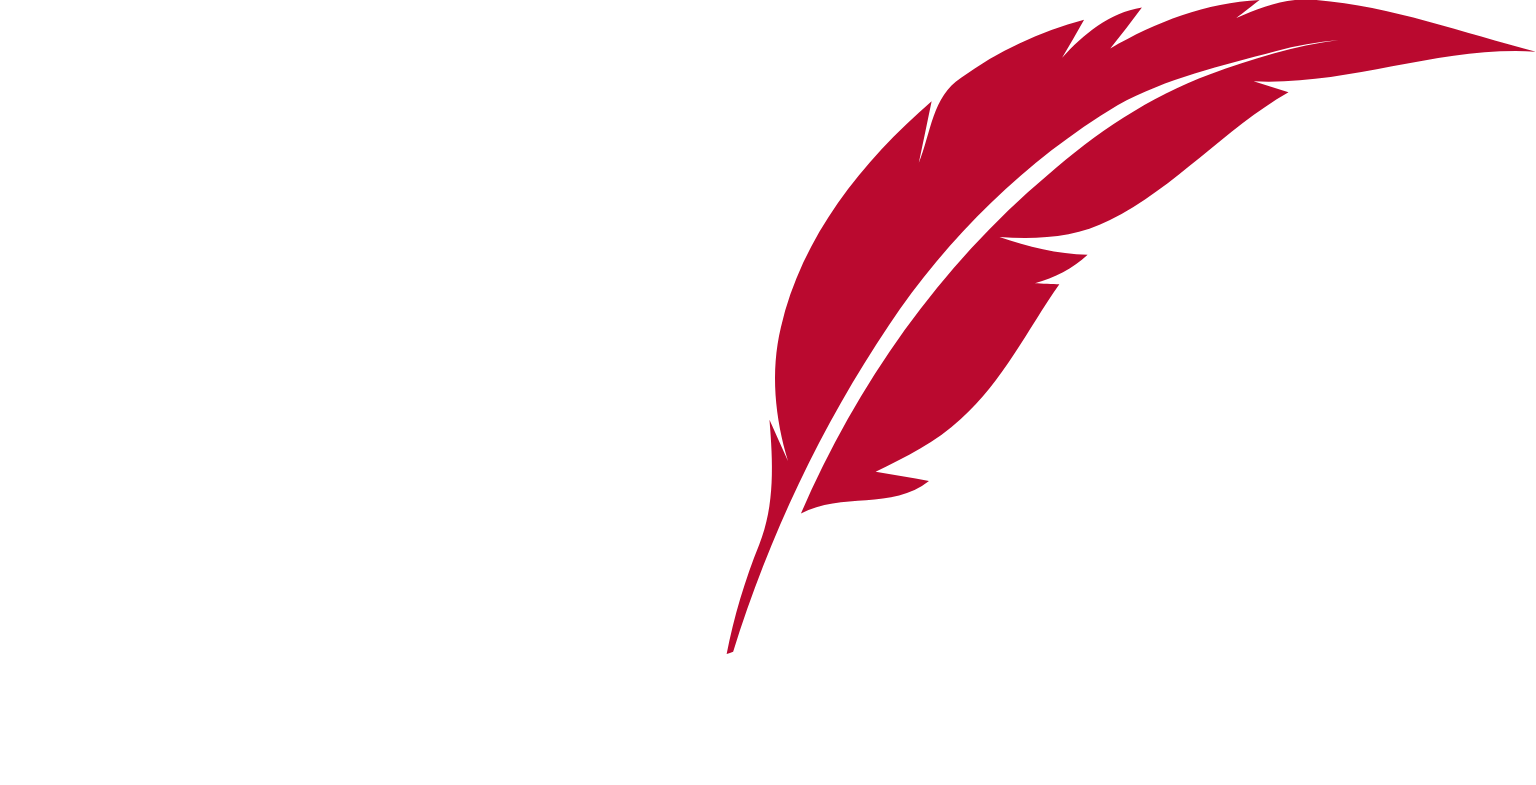 William Penn Bancorp logo in transparent PNG and vectorized SVG formats